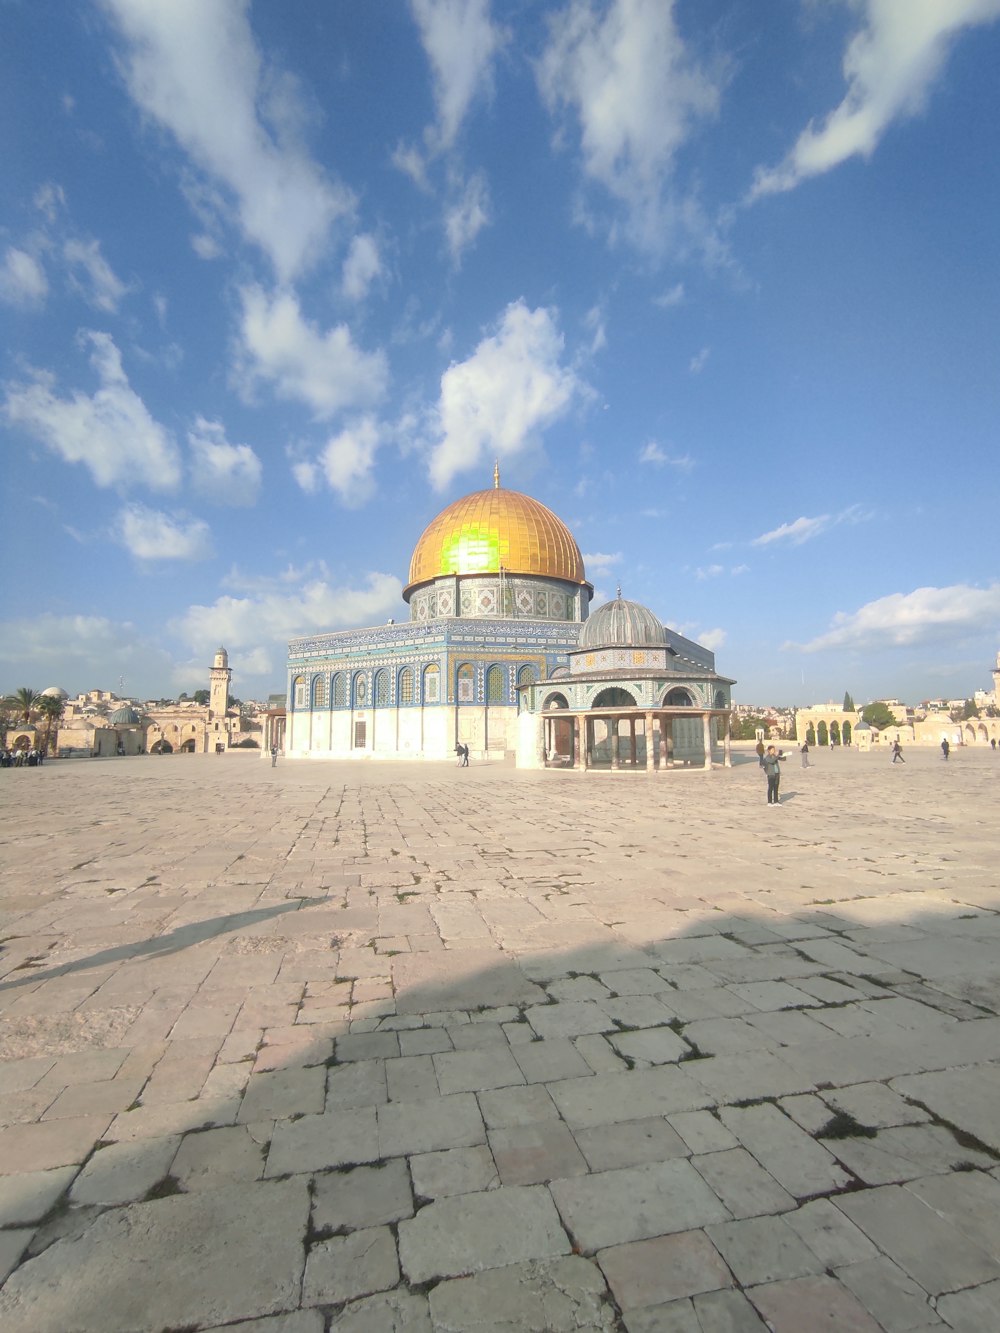 the dome of the rock in the middle of the desert